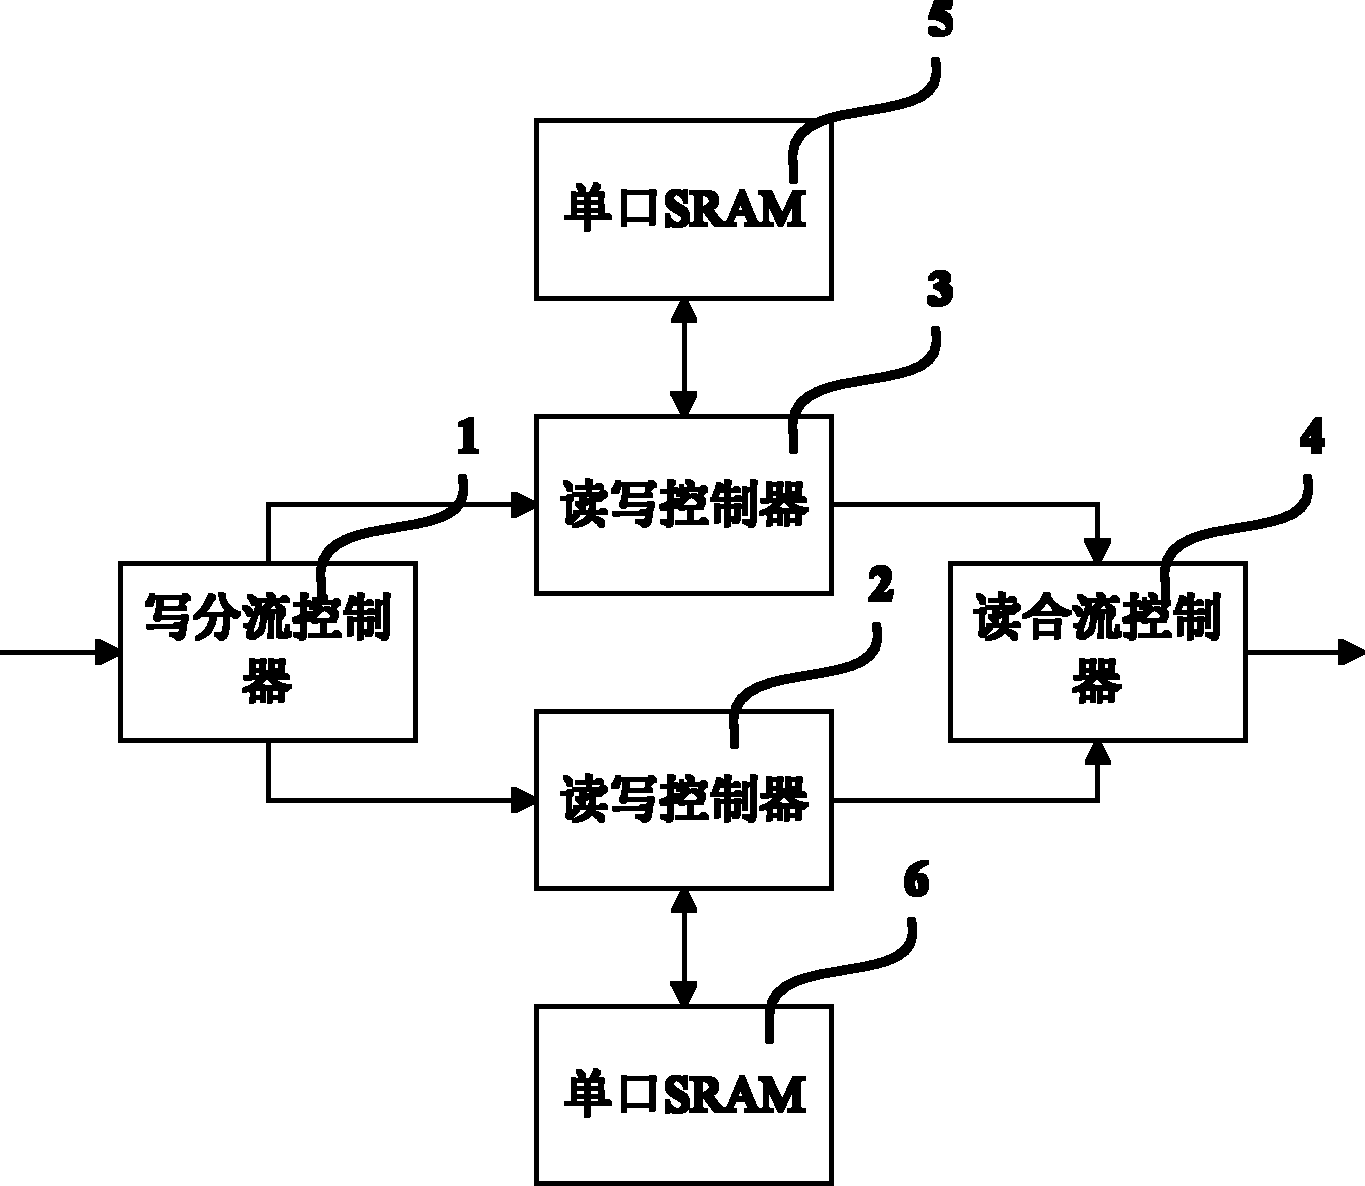 FIFO memory and storage controlling device